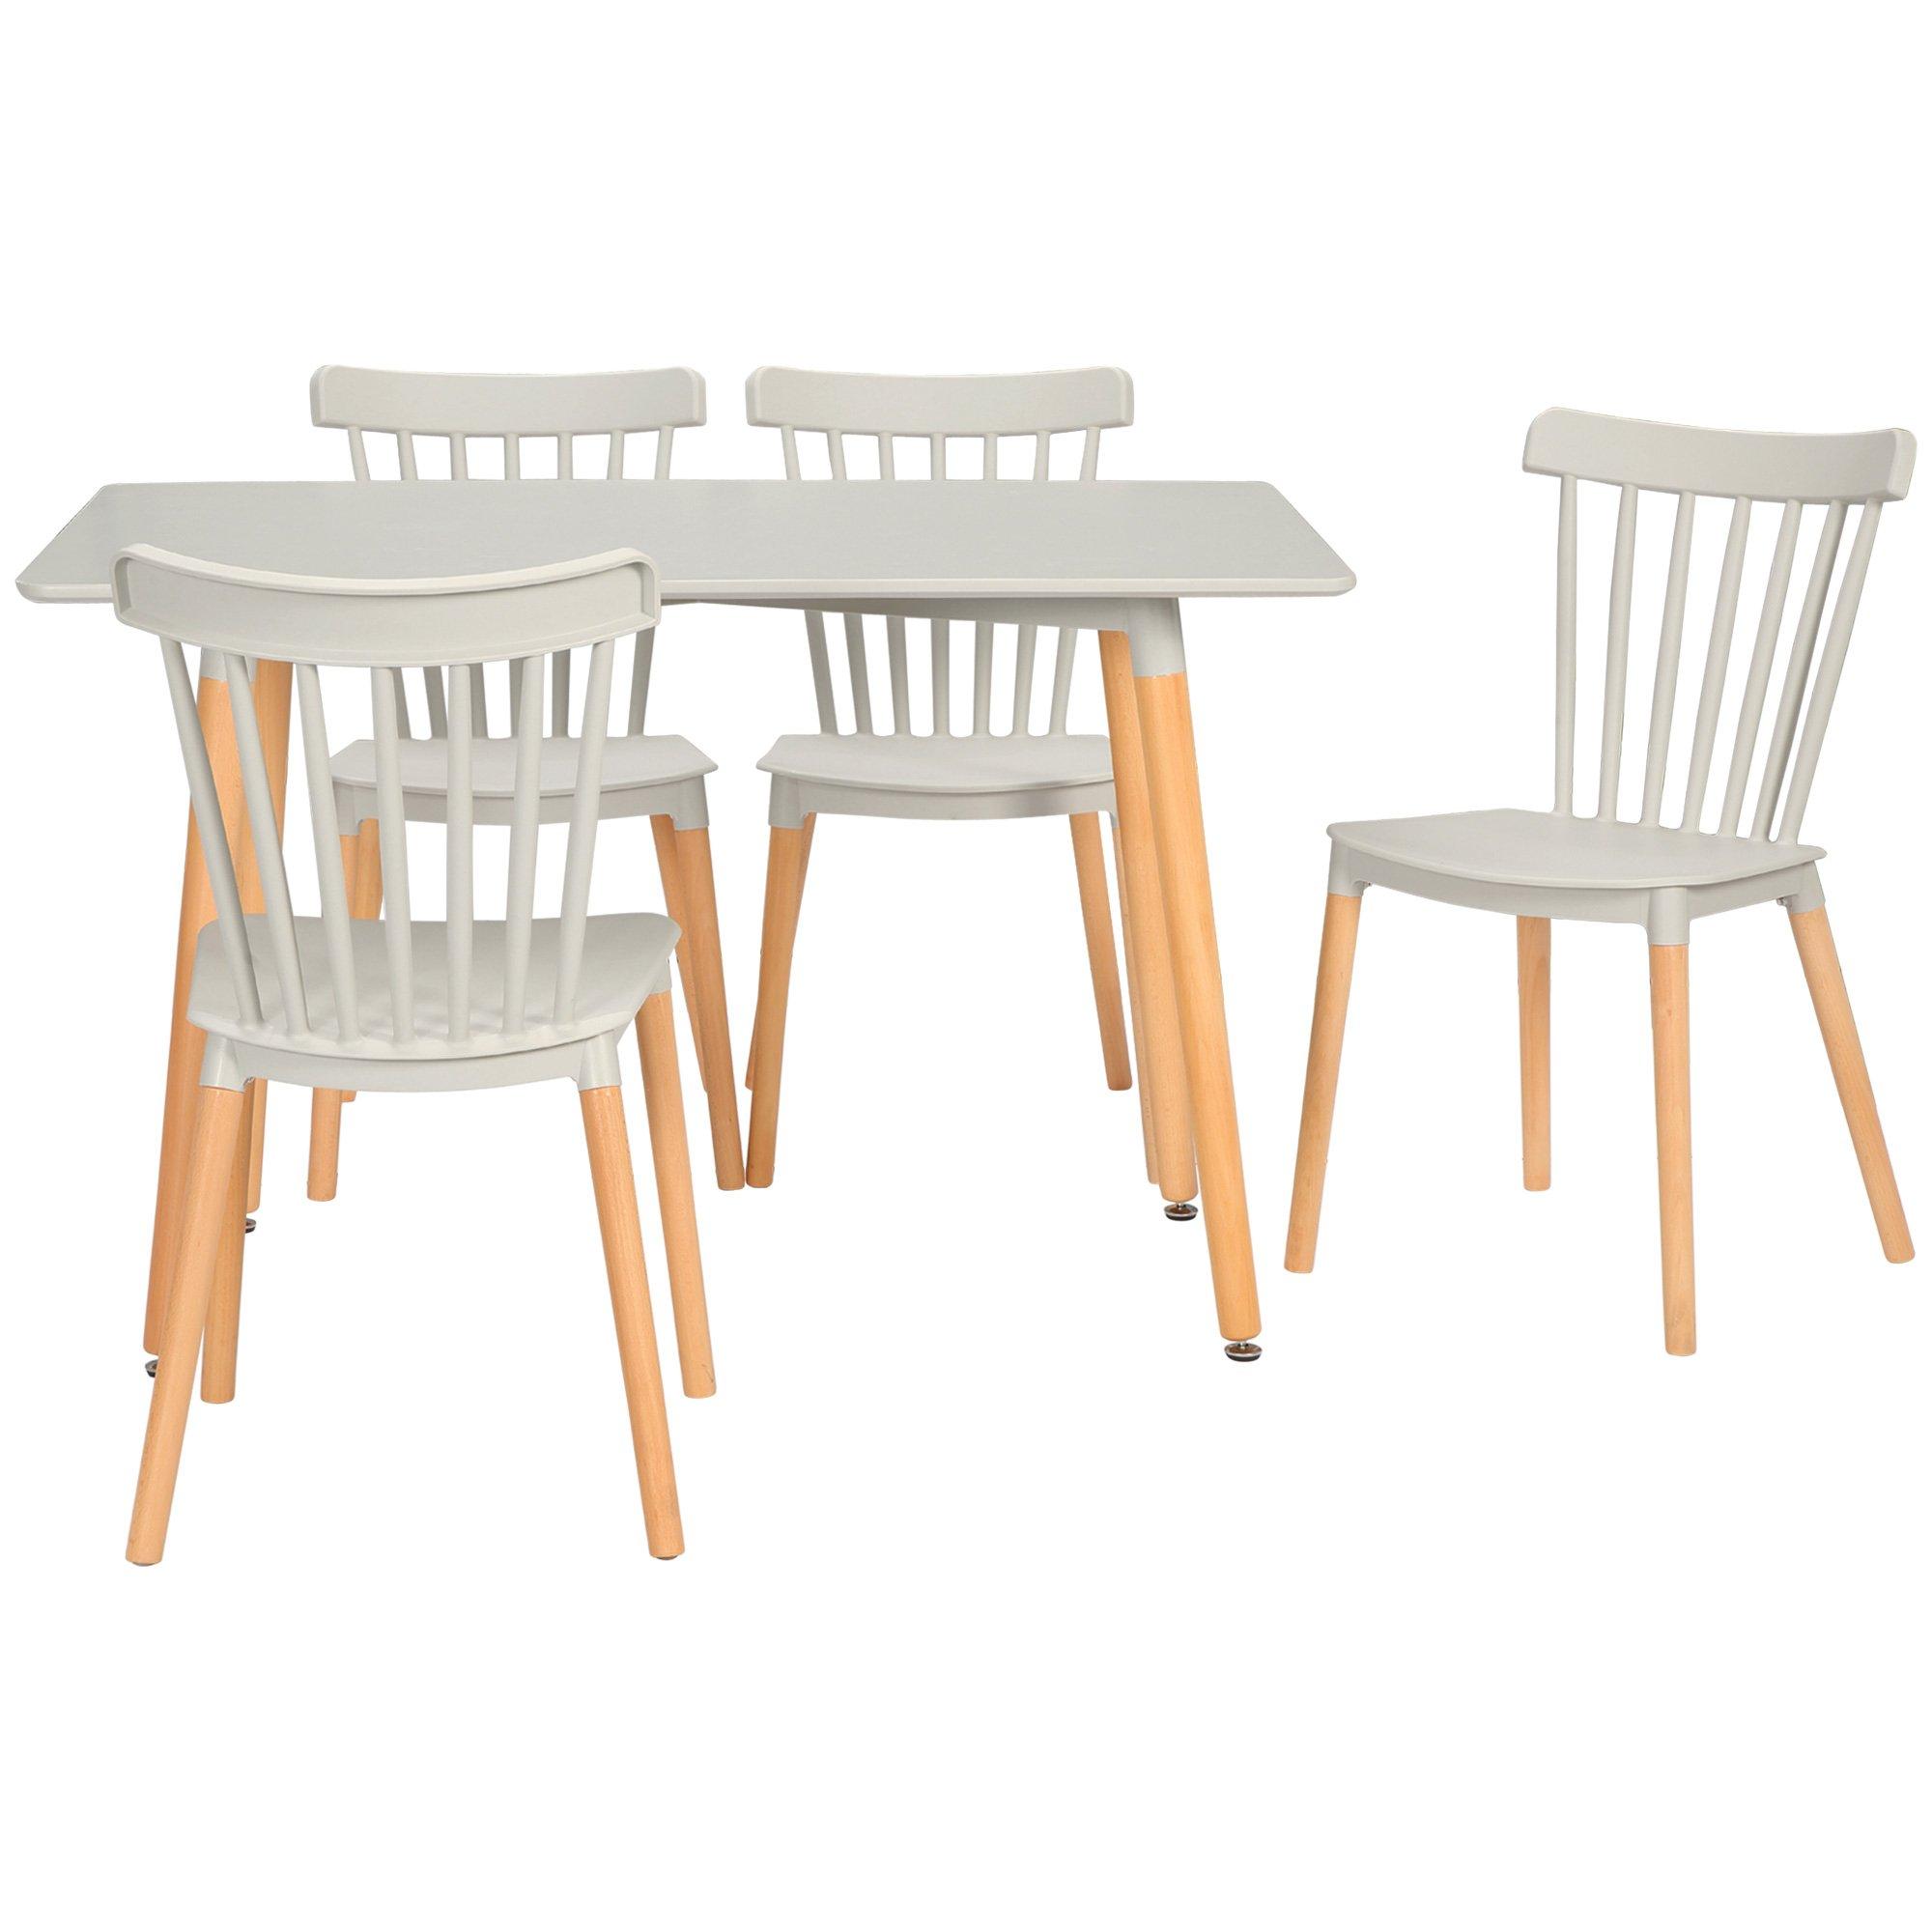 5 Piece Dining Table and Chairs Set Space Saving Dining Table 4 Chairs